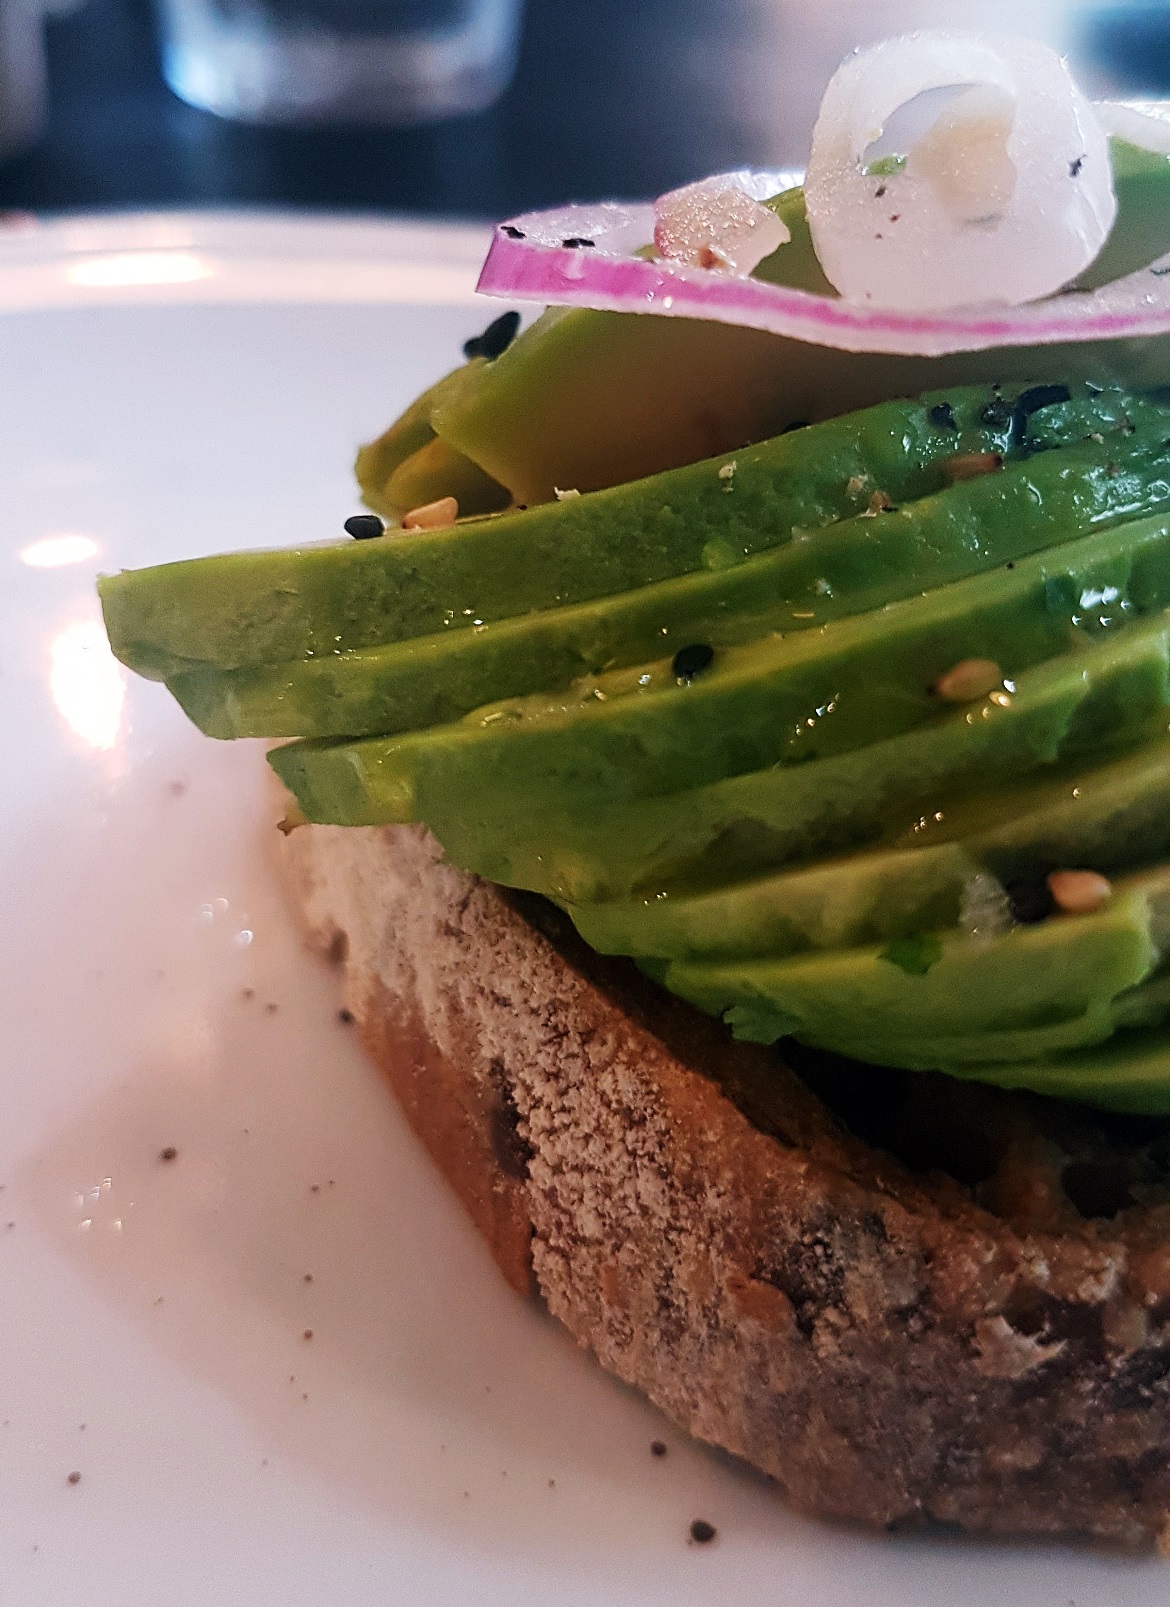 Avocado on toast - Review of North Star Coffee Shop by BeckyBecky Blogs